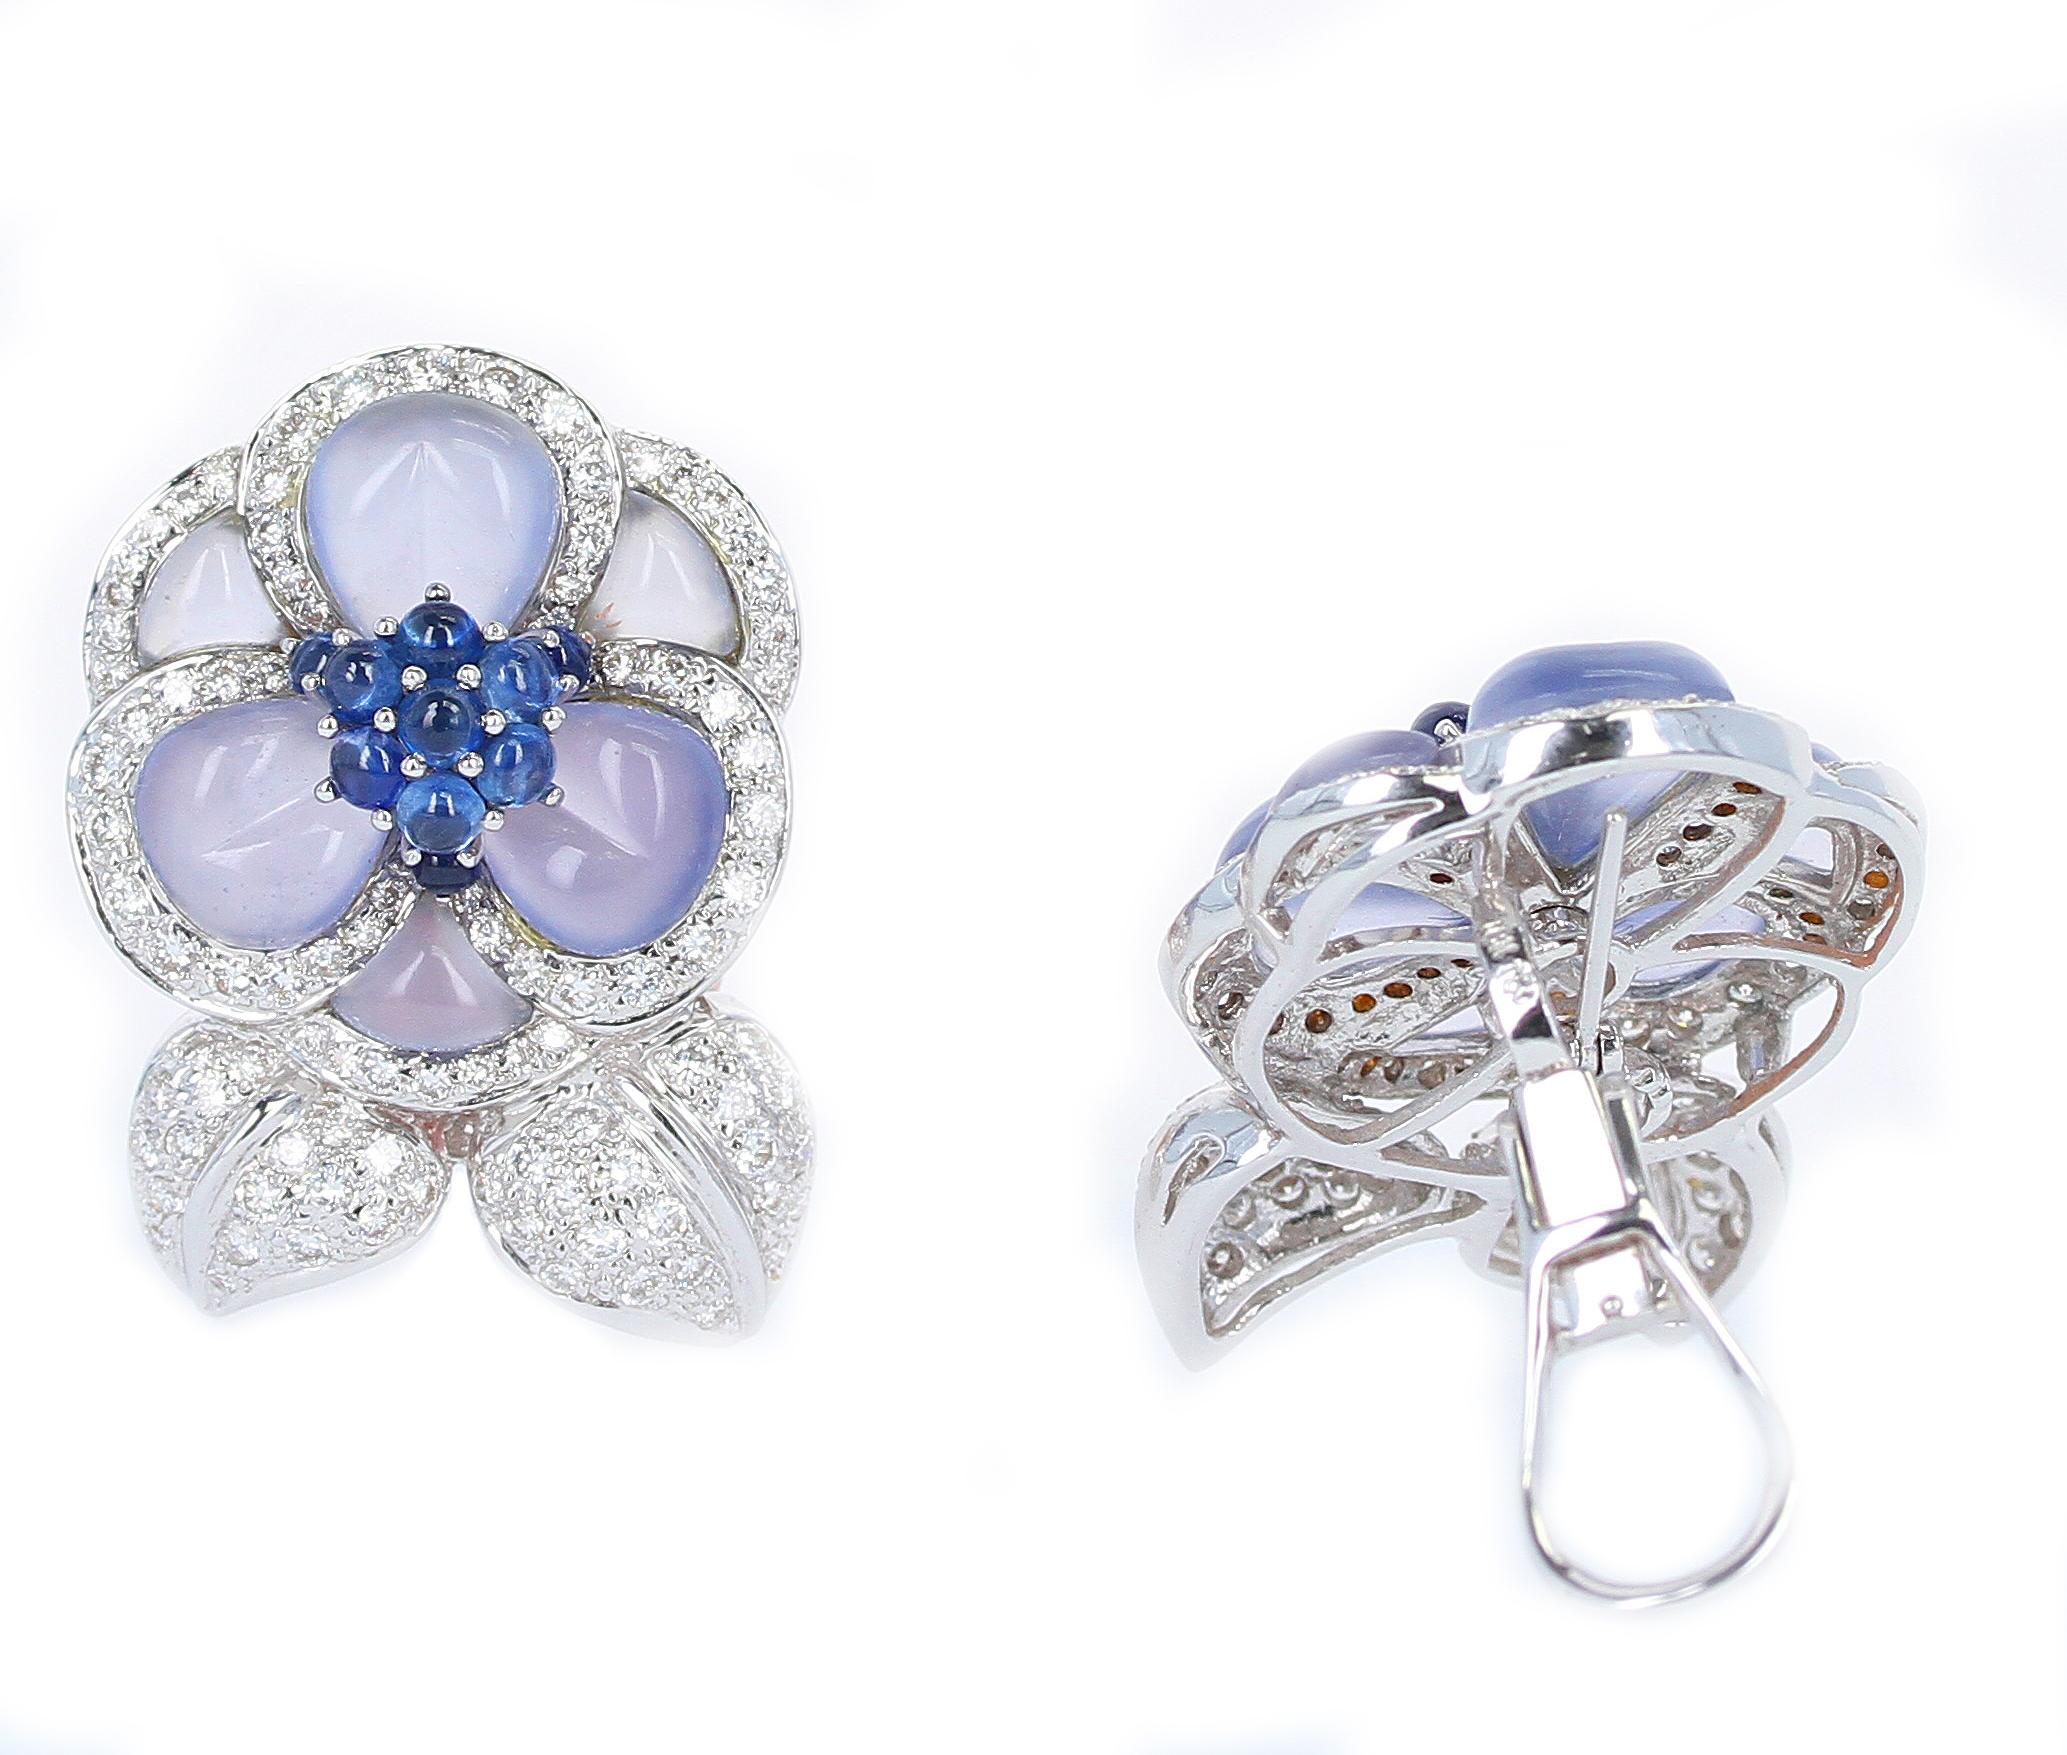 Carved Chalcedony Floral Earrings with Diamonds and Sapphires, White Gold 1